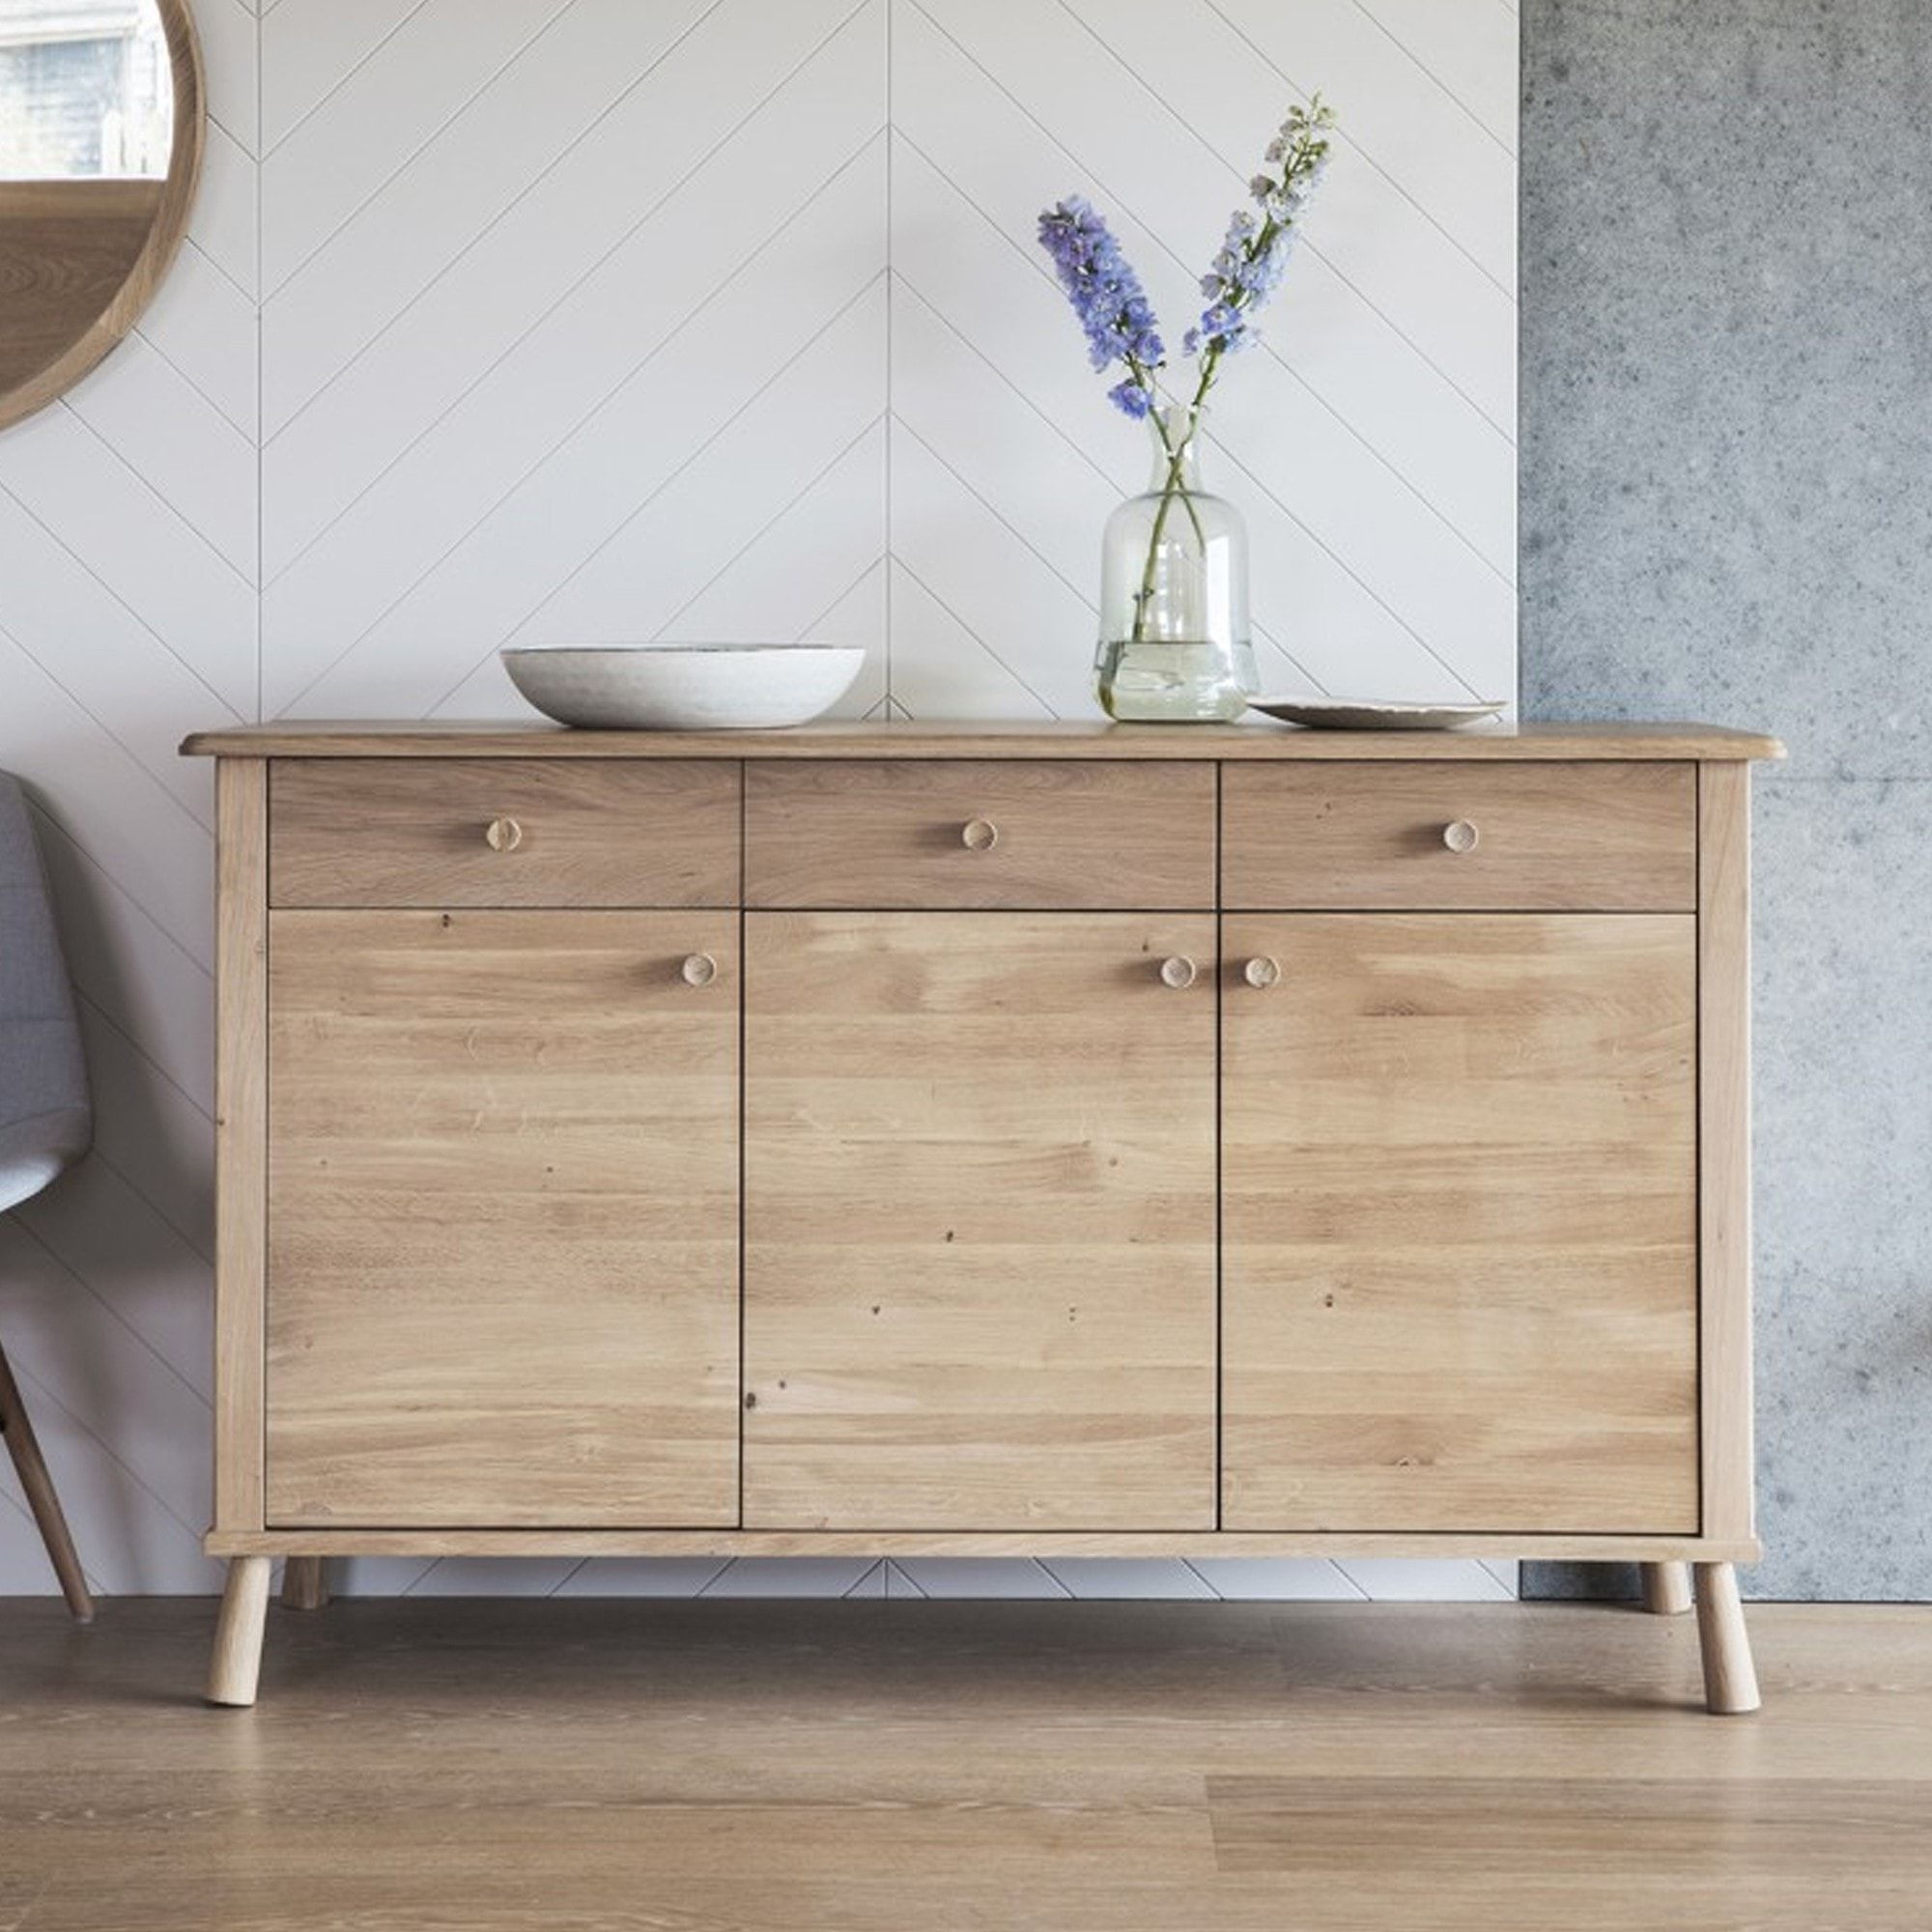 Wooden Sideboards With Storage (View 7 of 10)